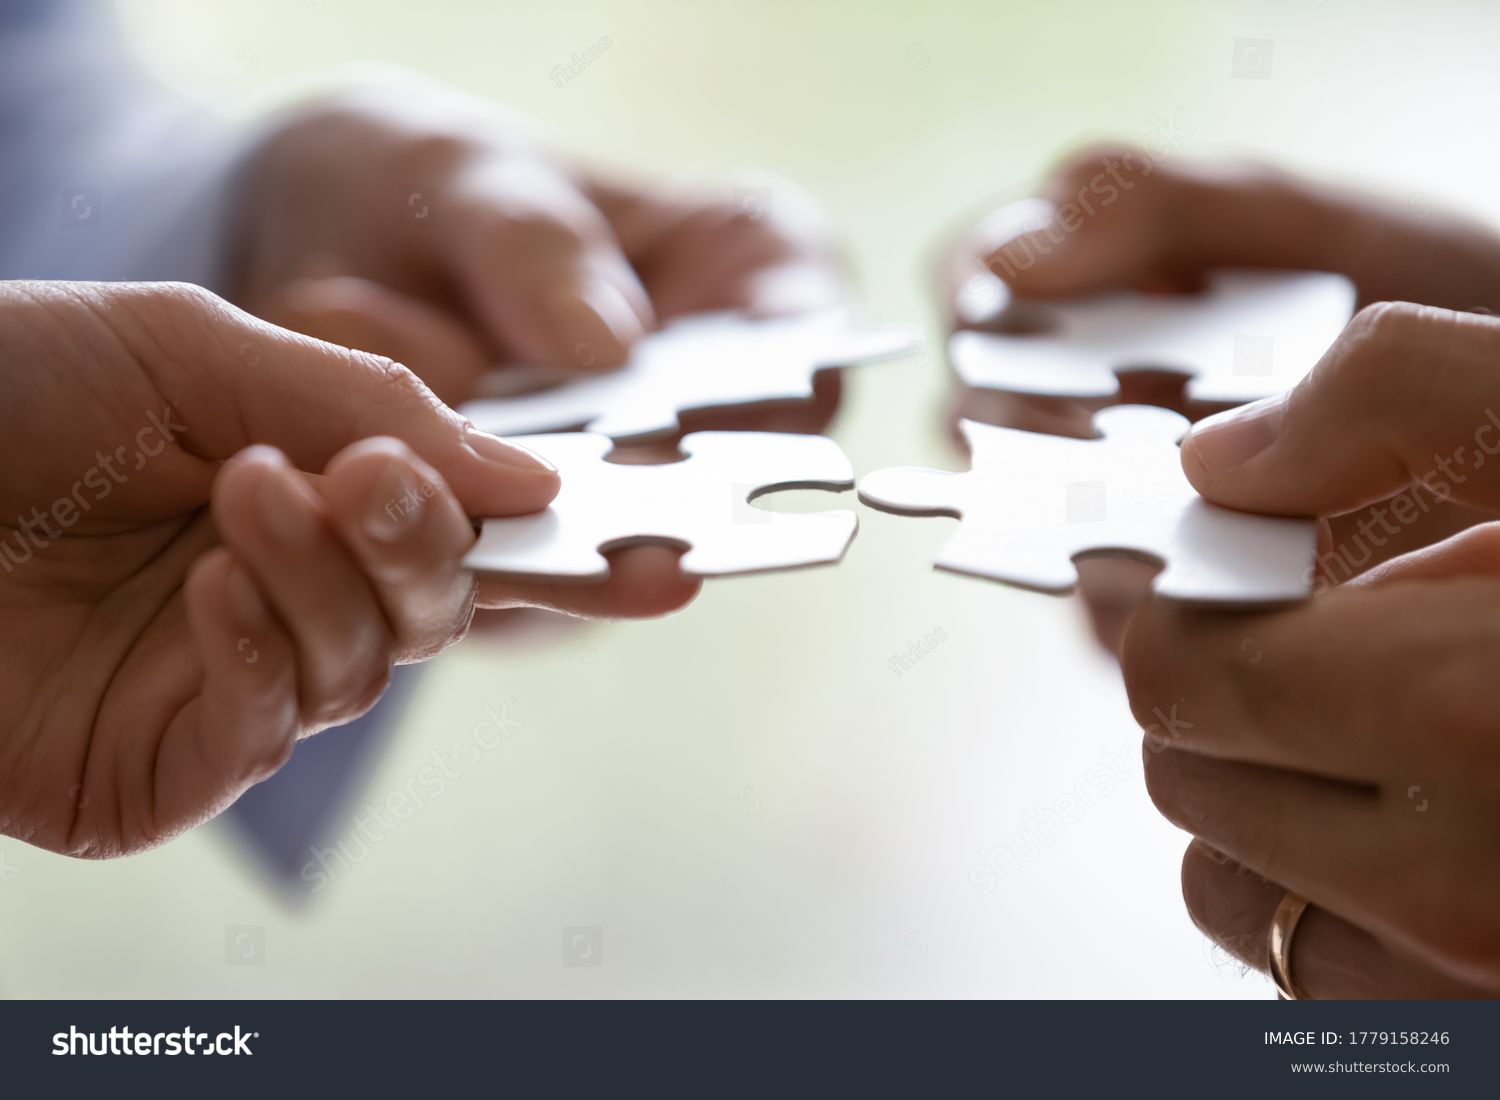 Close up hands of four businesspeople hold pieces of white puzzle, assemble jigsaw, put it together, joint path to problem solution, find way out exit of difficult situation. Support, teamwork concept #1779158246